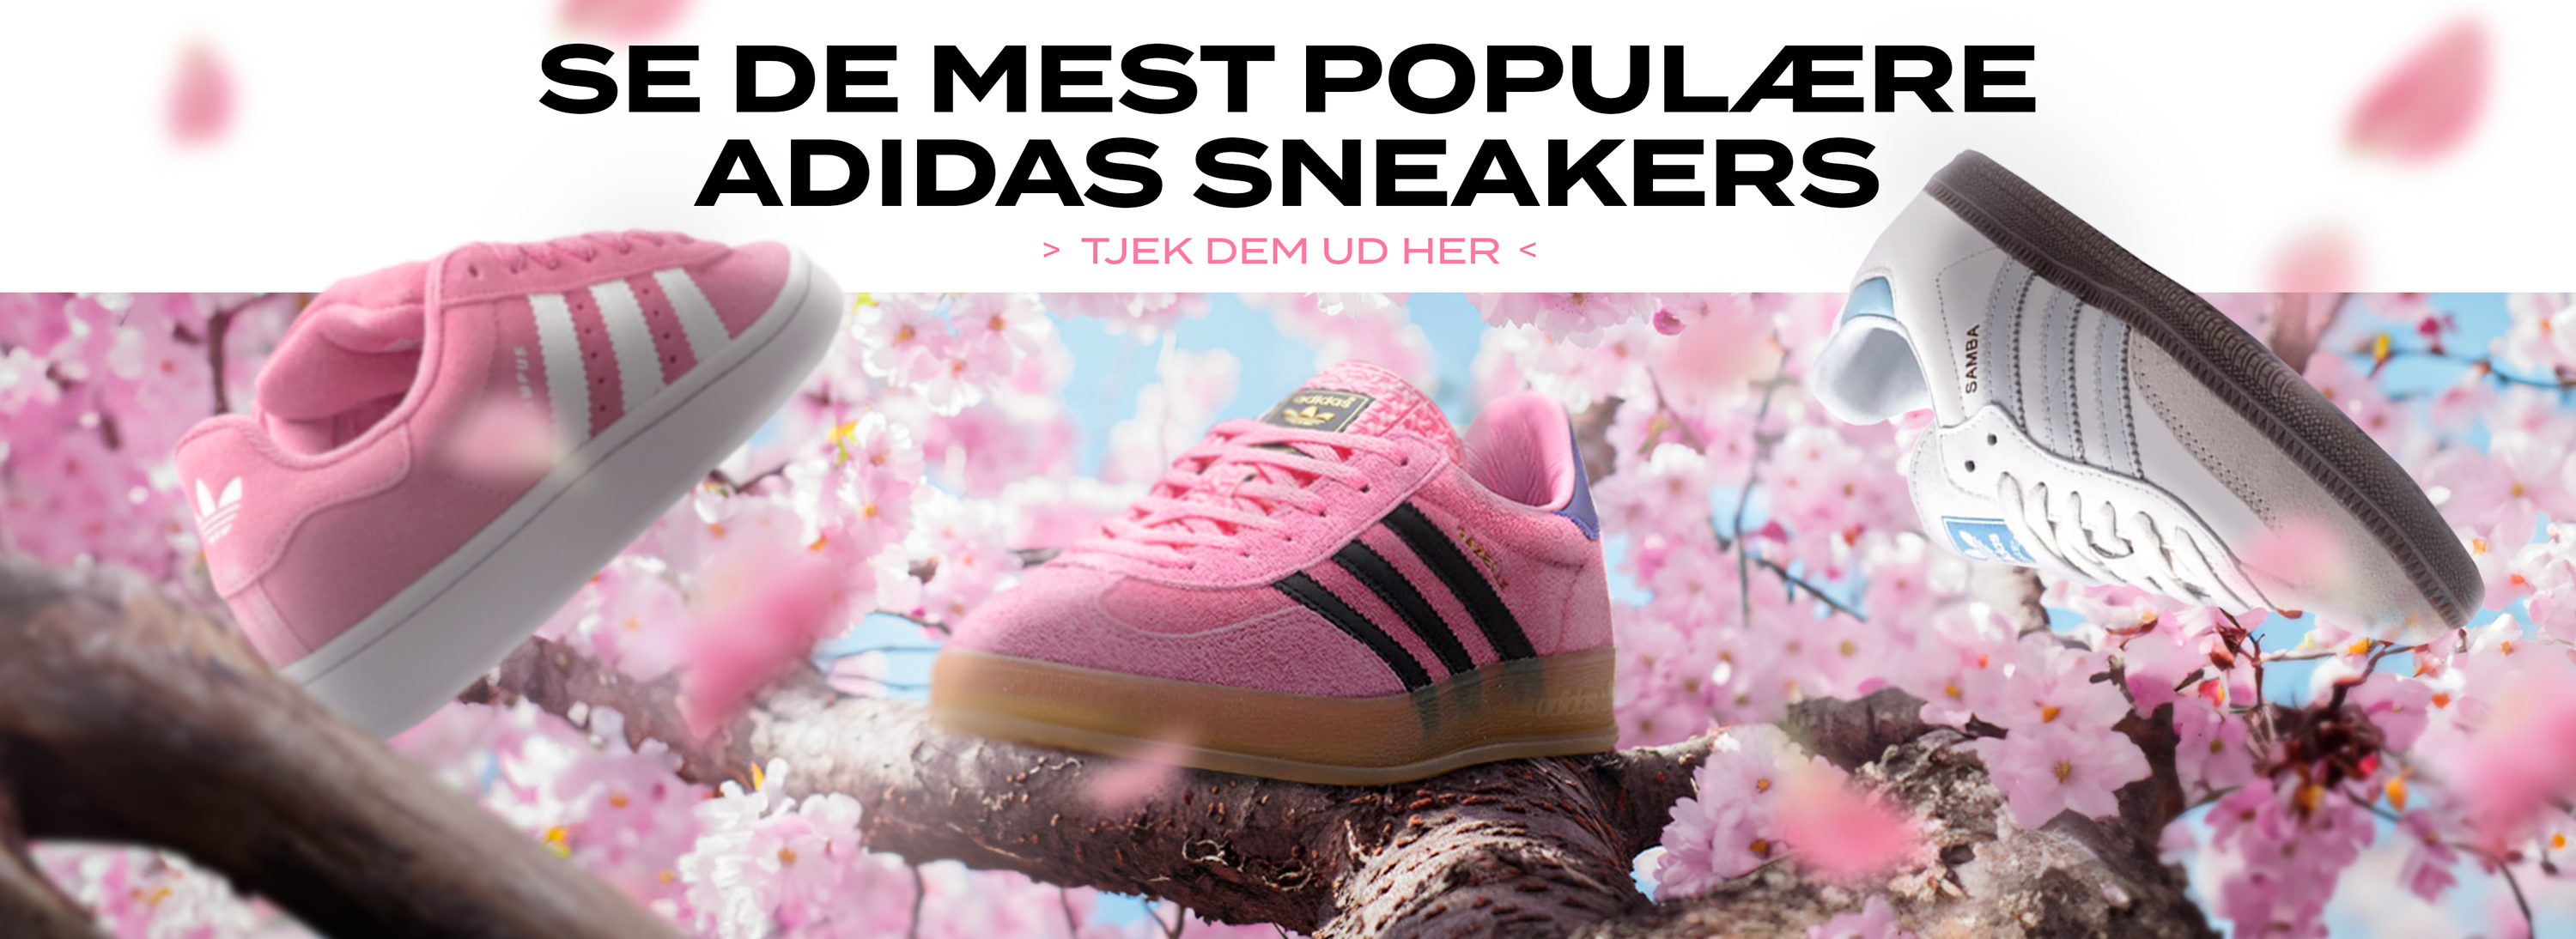 adidas sneakers banner